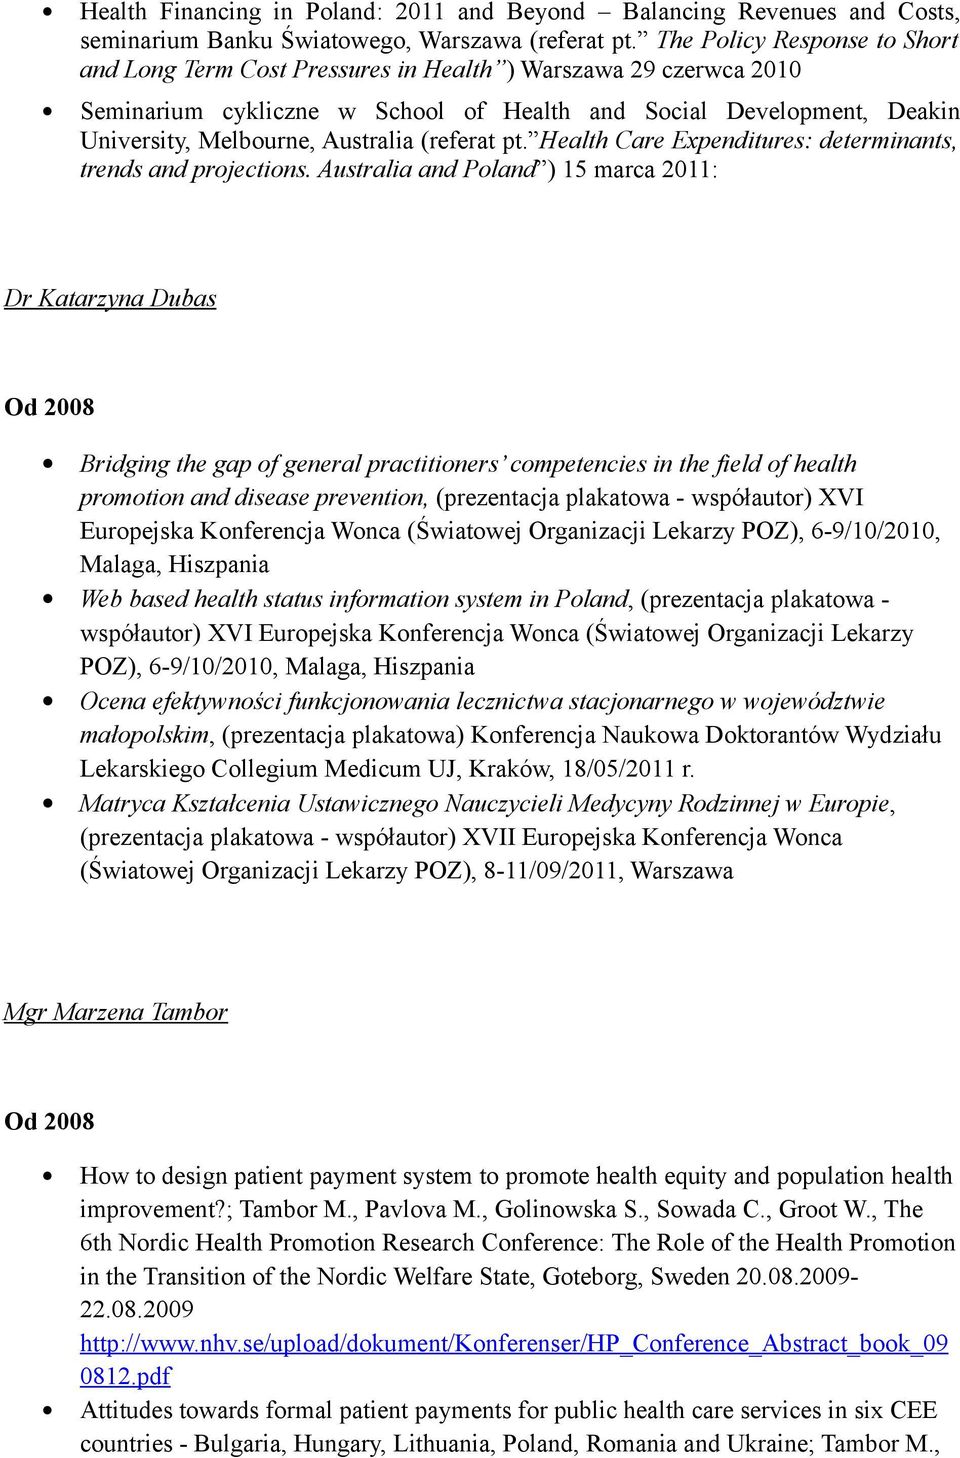 (referat pt. Health Care Expenditures: determinants, trends and projections.